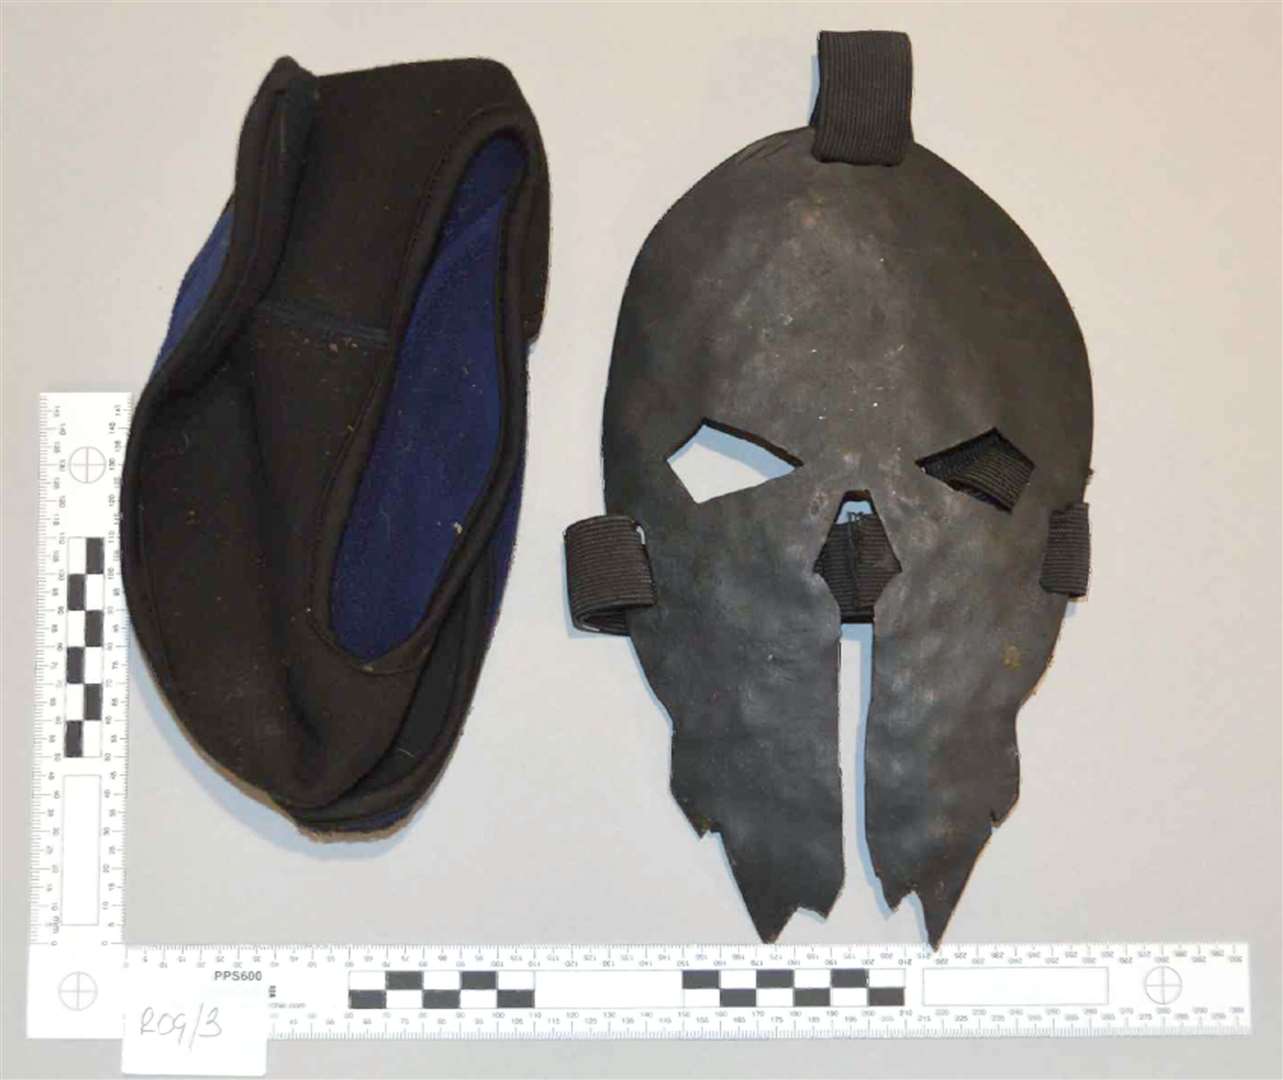 A mask which Jaswant Singh Chail, 21, was wearing when arrested (CPS/PA)